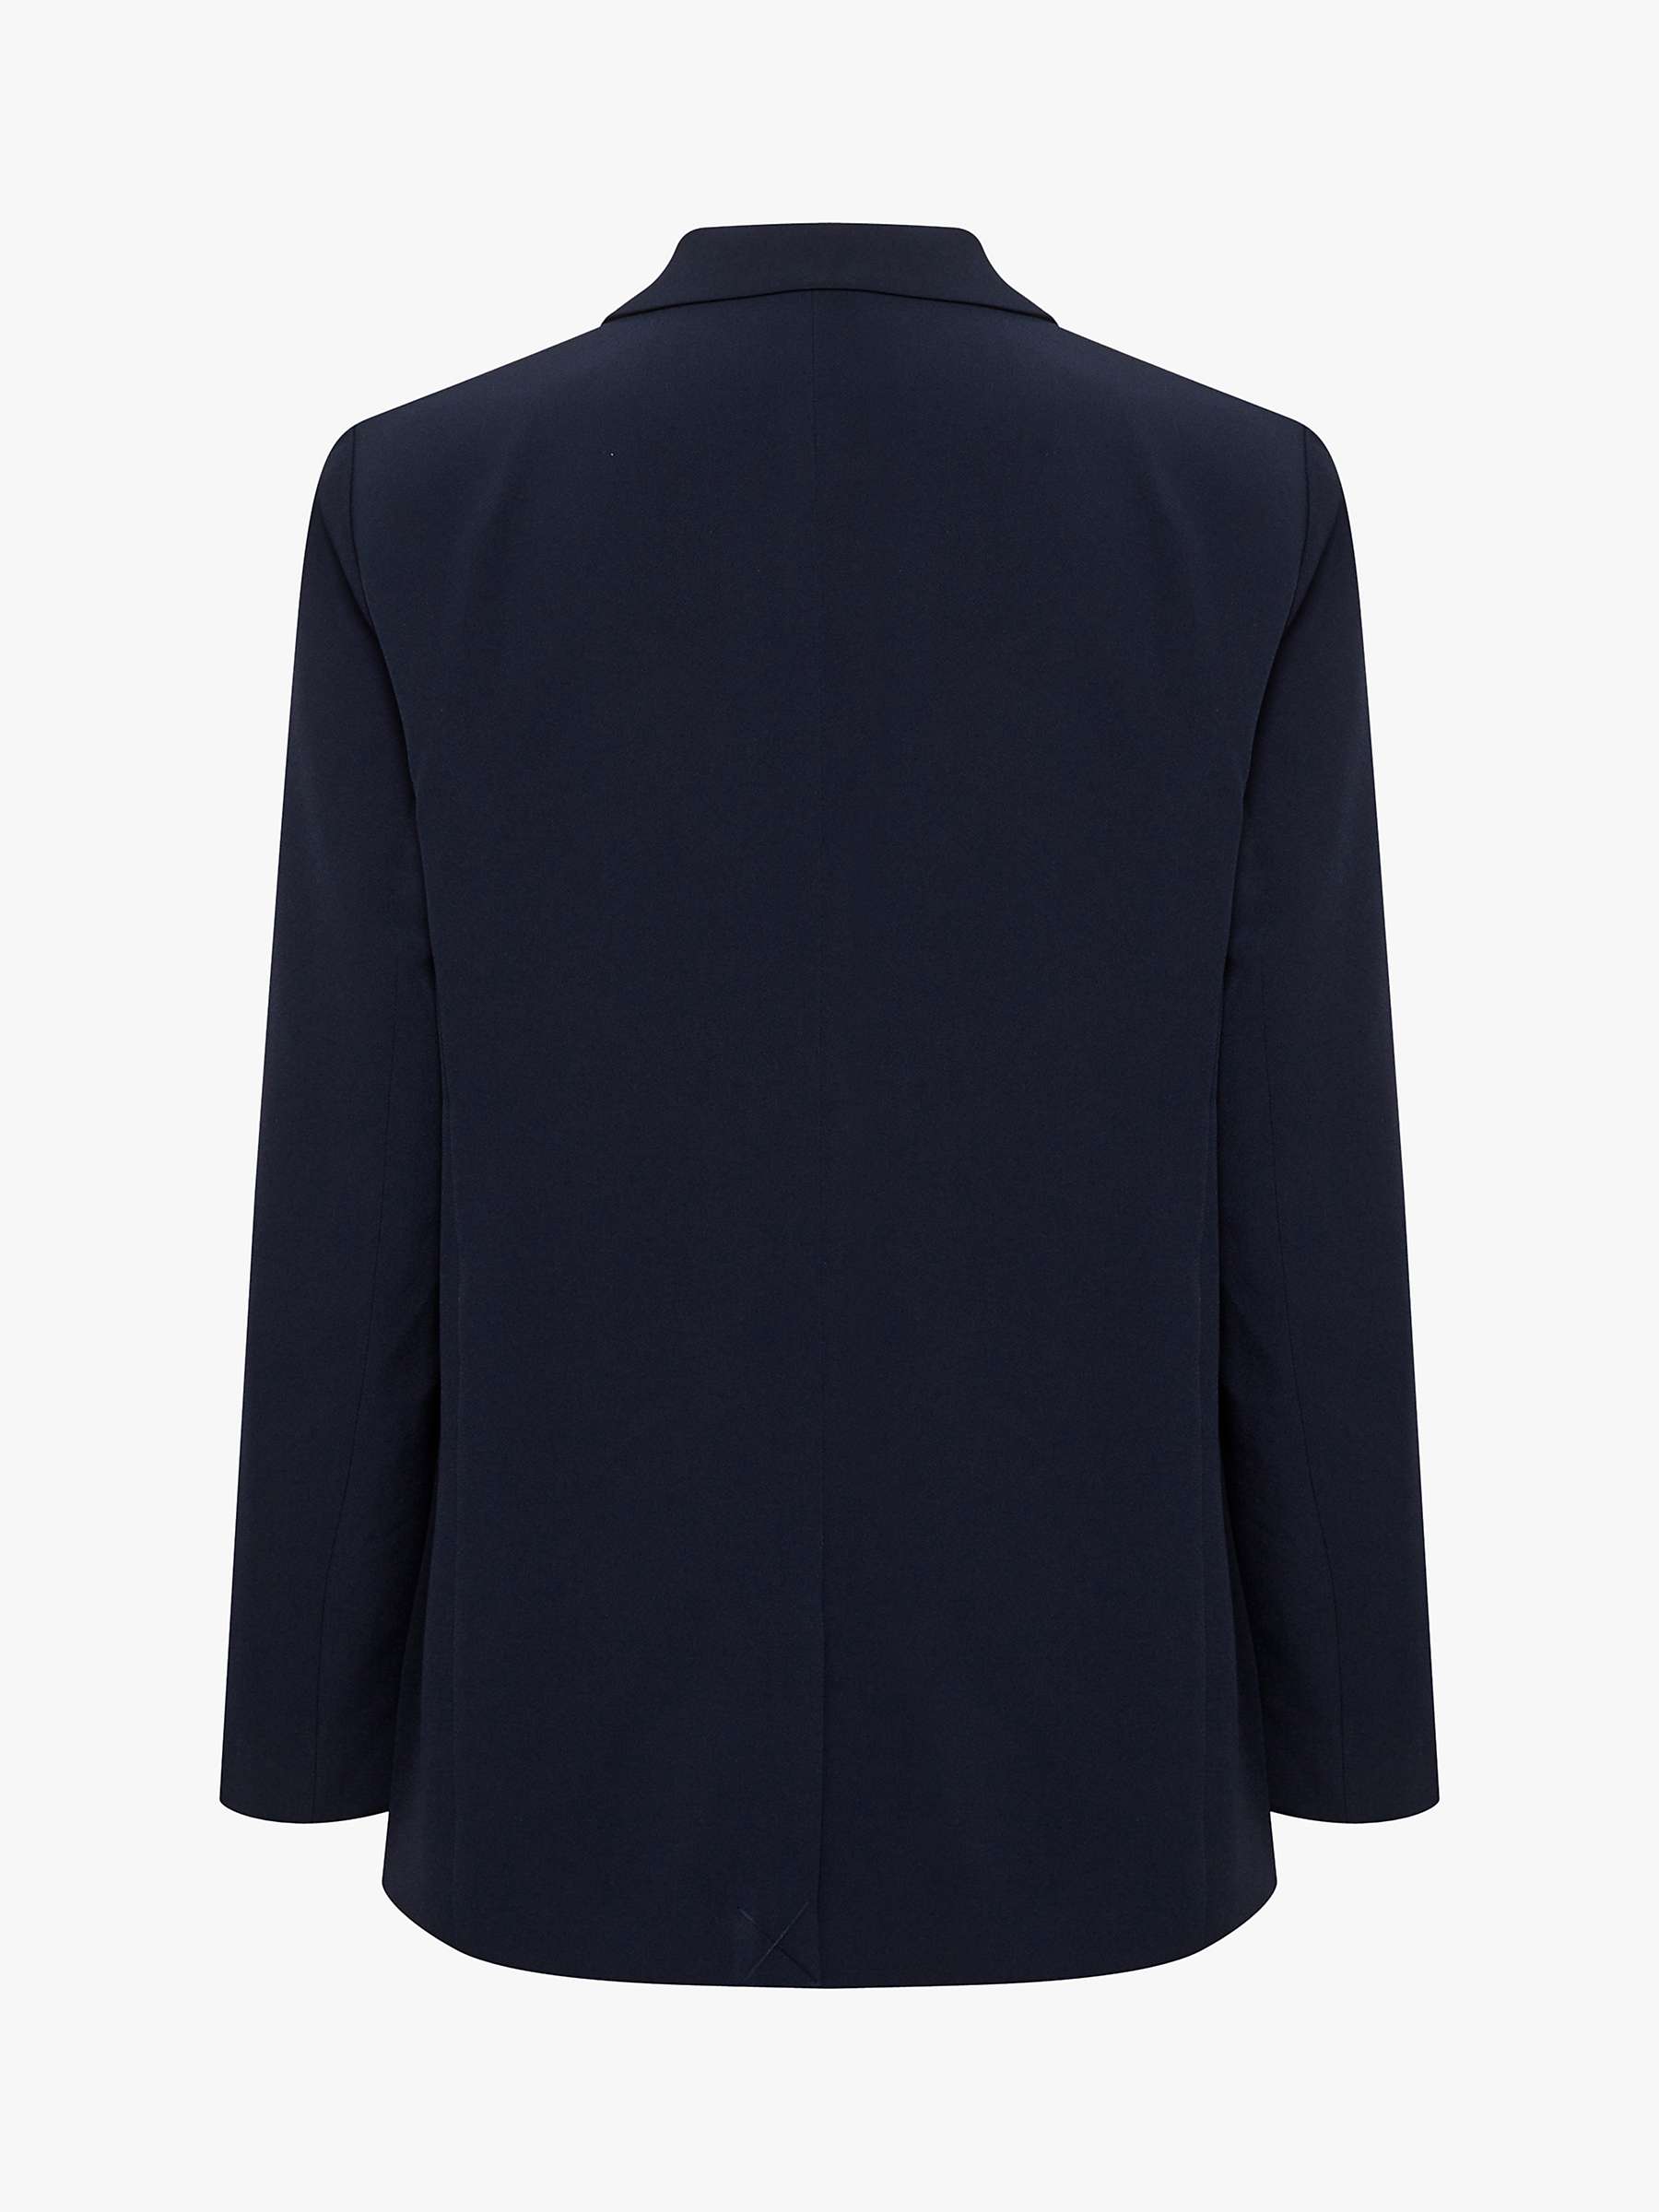 Buy MY ESSENTIAL WARDROBE Tailored Double Breasted Blazer, Baritone Blue Online at johnlewis.com